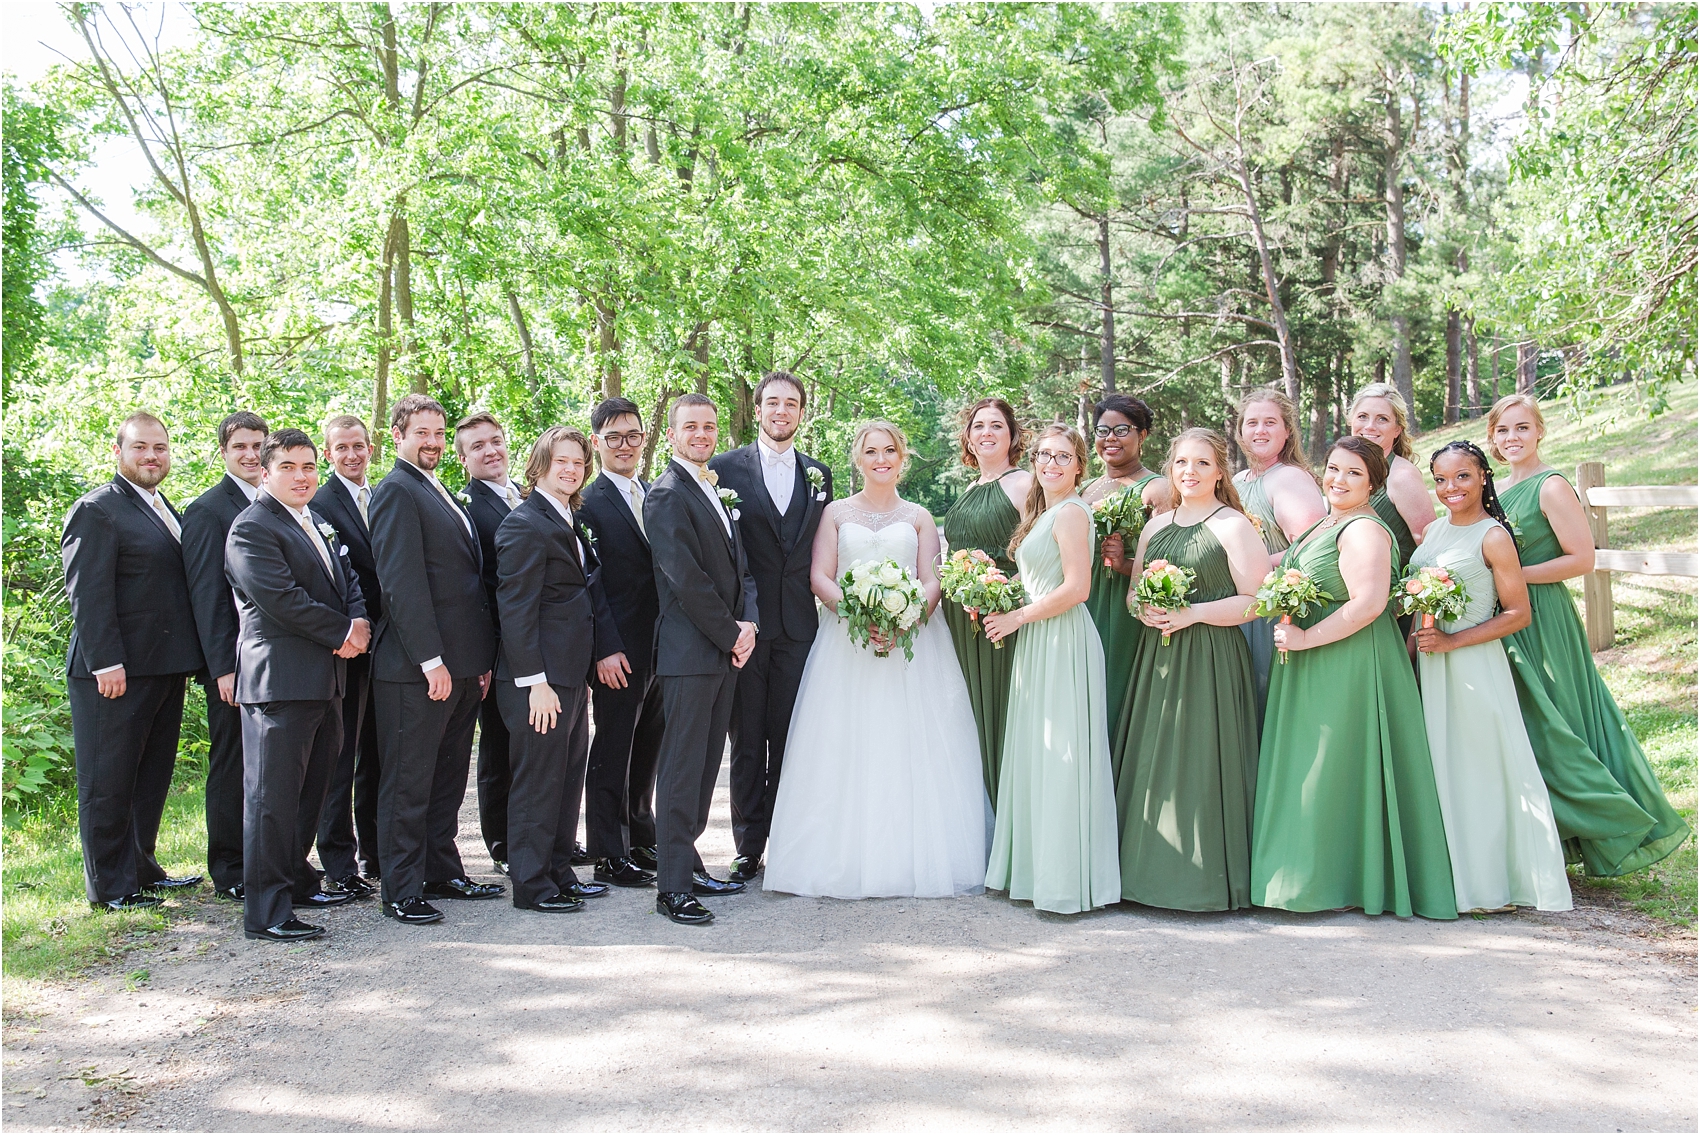 lord-of-the-rings-inspired-wedding-photos-at-crystal-gardens-in-howell-mi-by-courtney-carolyn-photography_0056.jpg